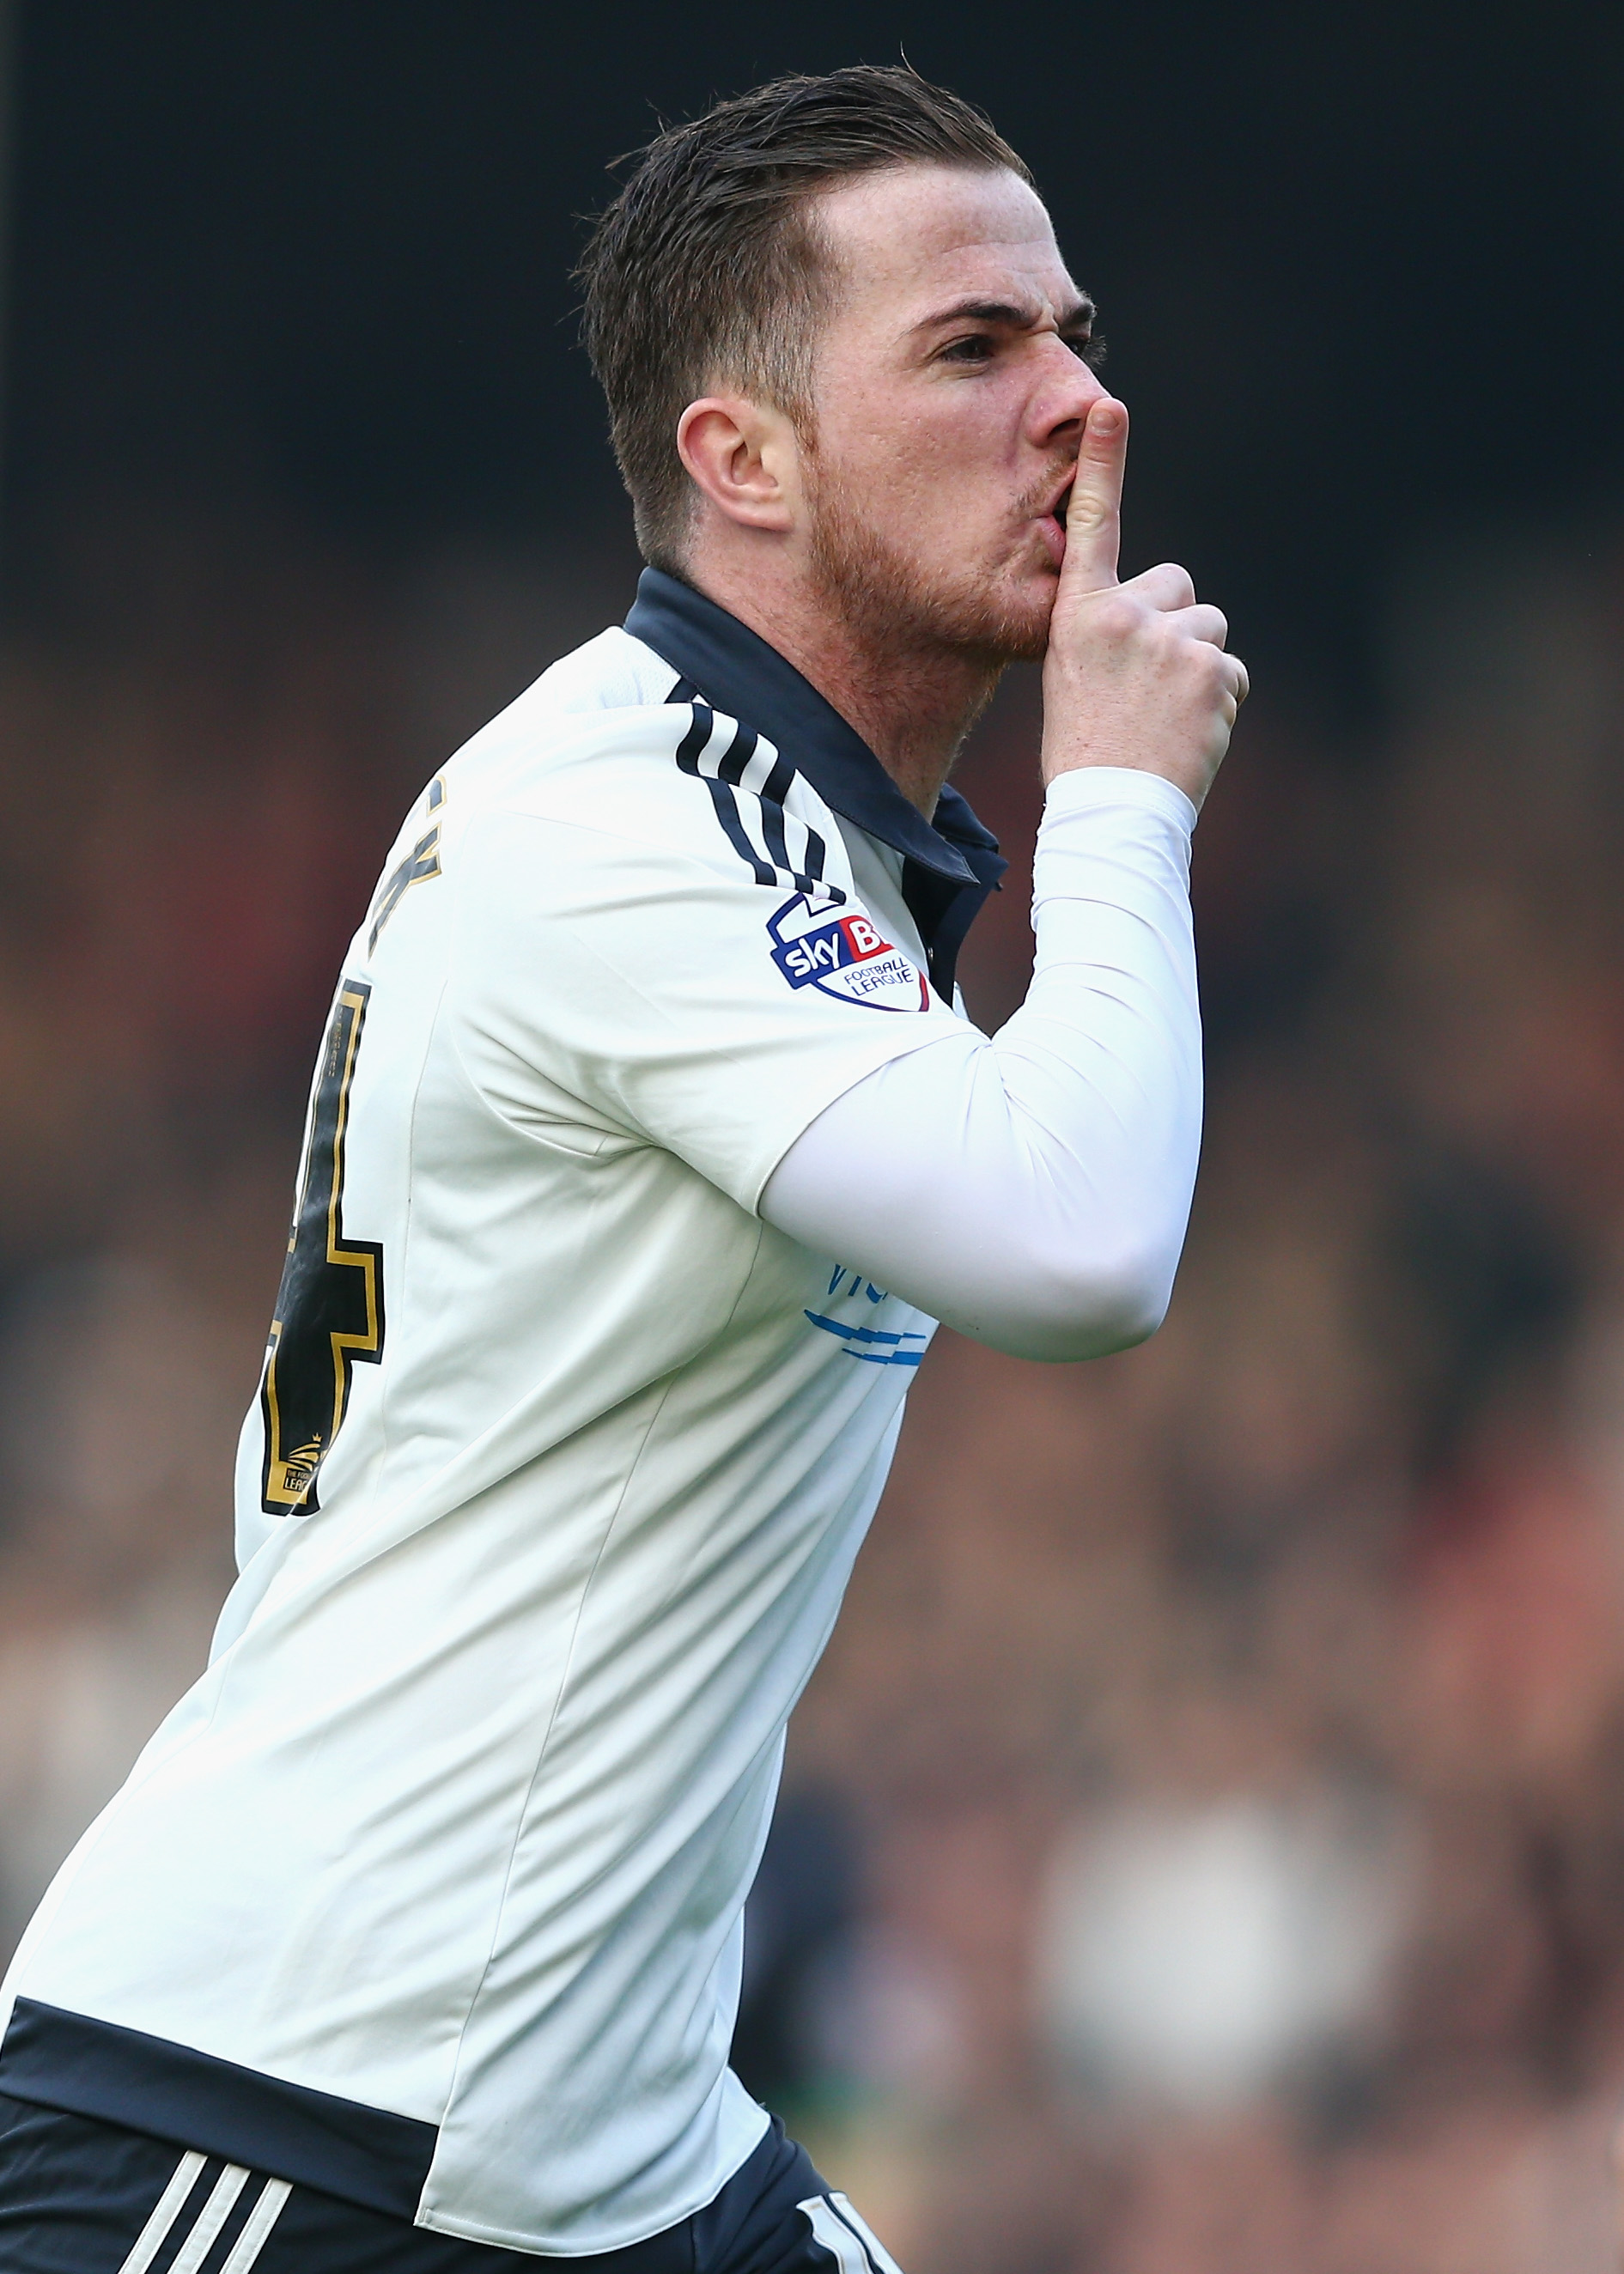 Ross McCormack - My number 1 signing.